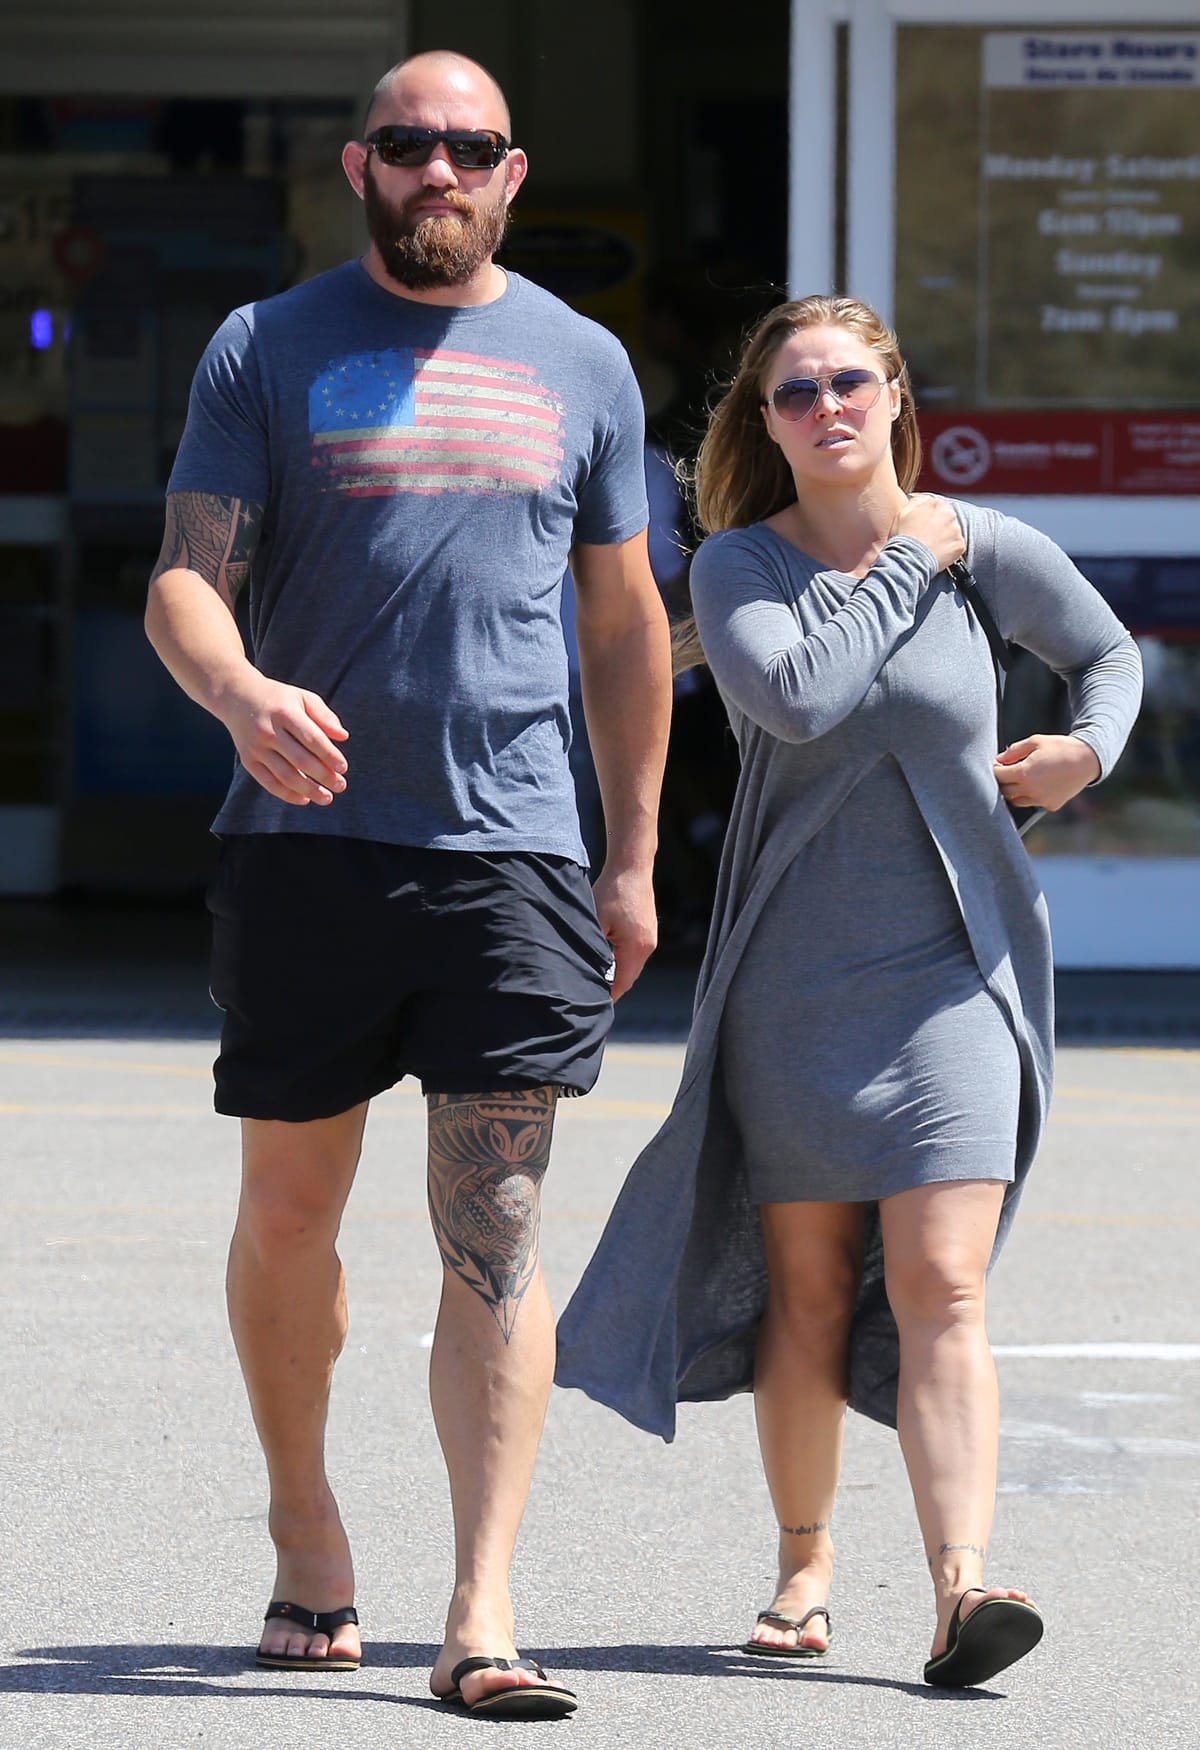 Ronda Jean Rousey is five years younger and much shorter than her husband Travis Kuualiialoha Browne